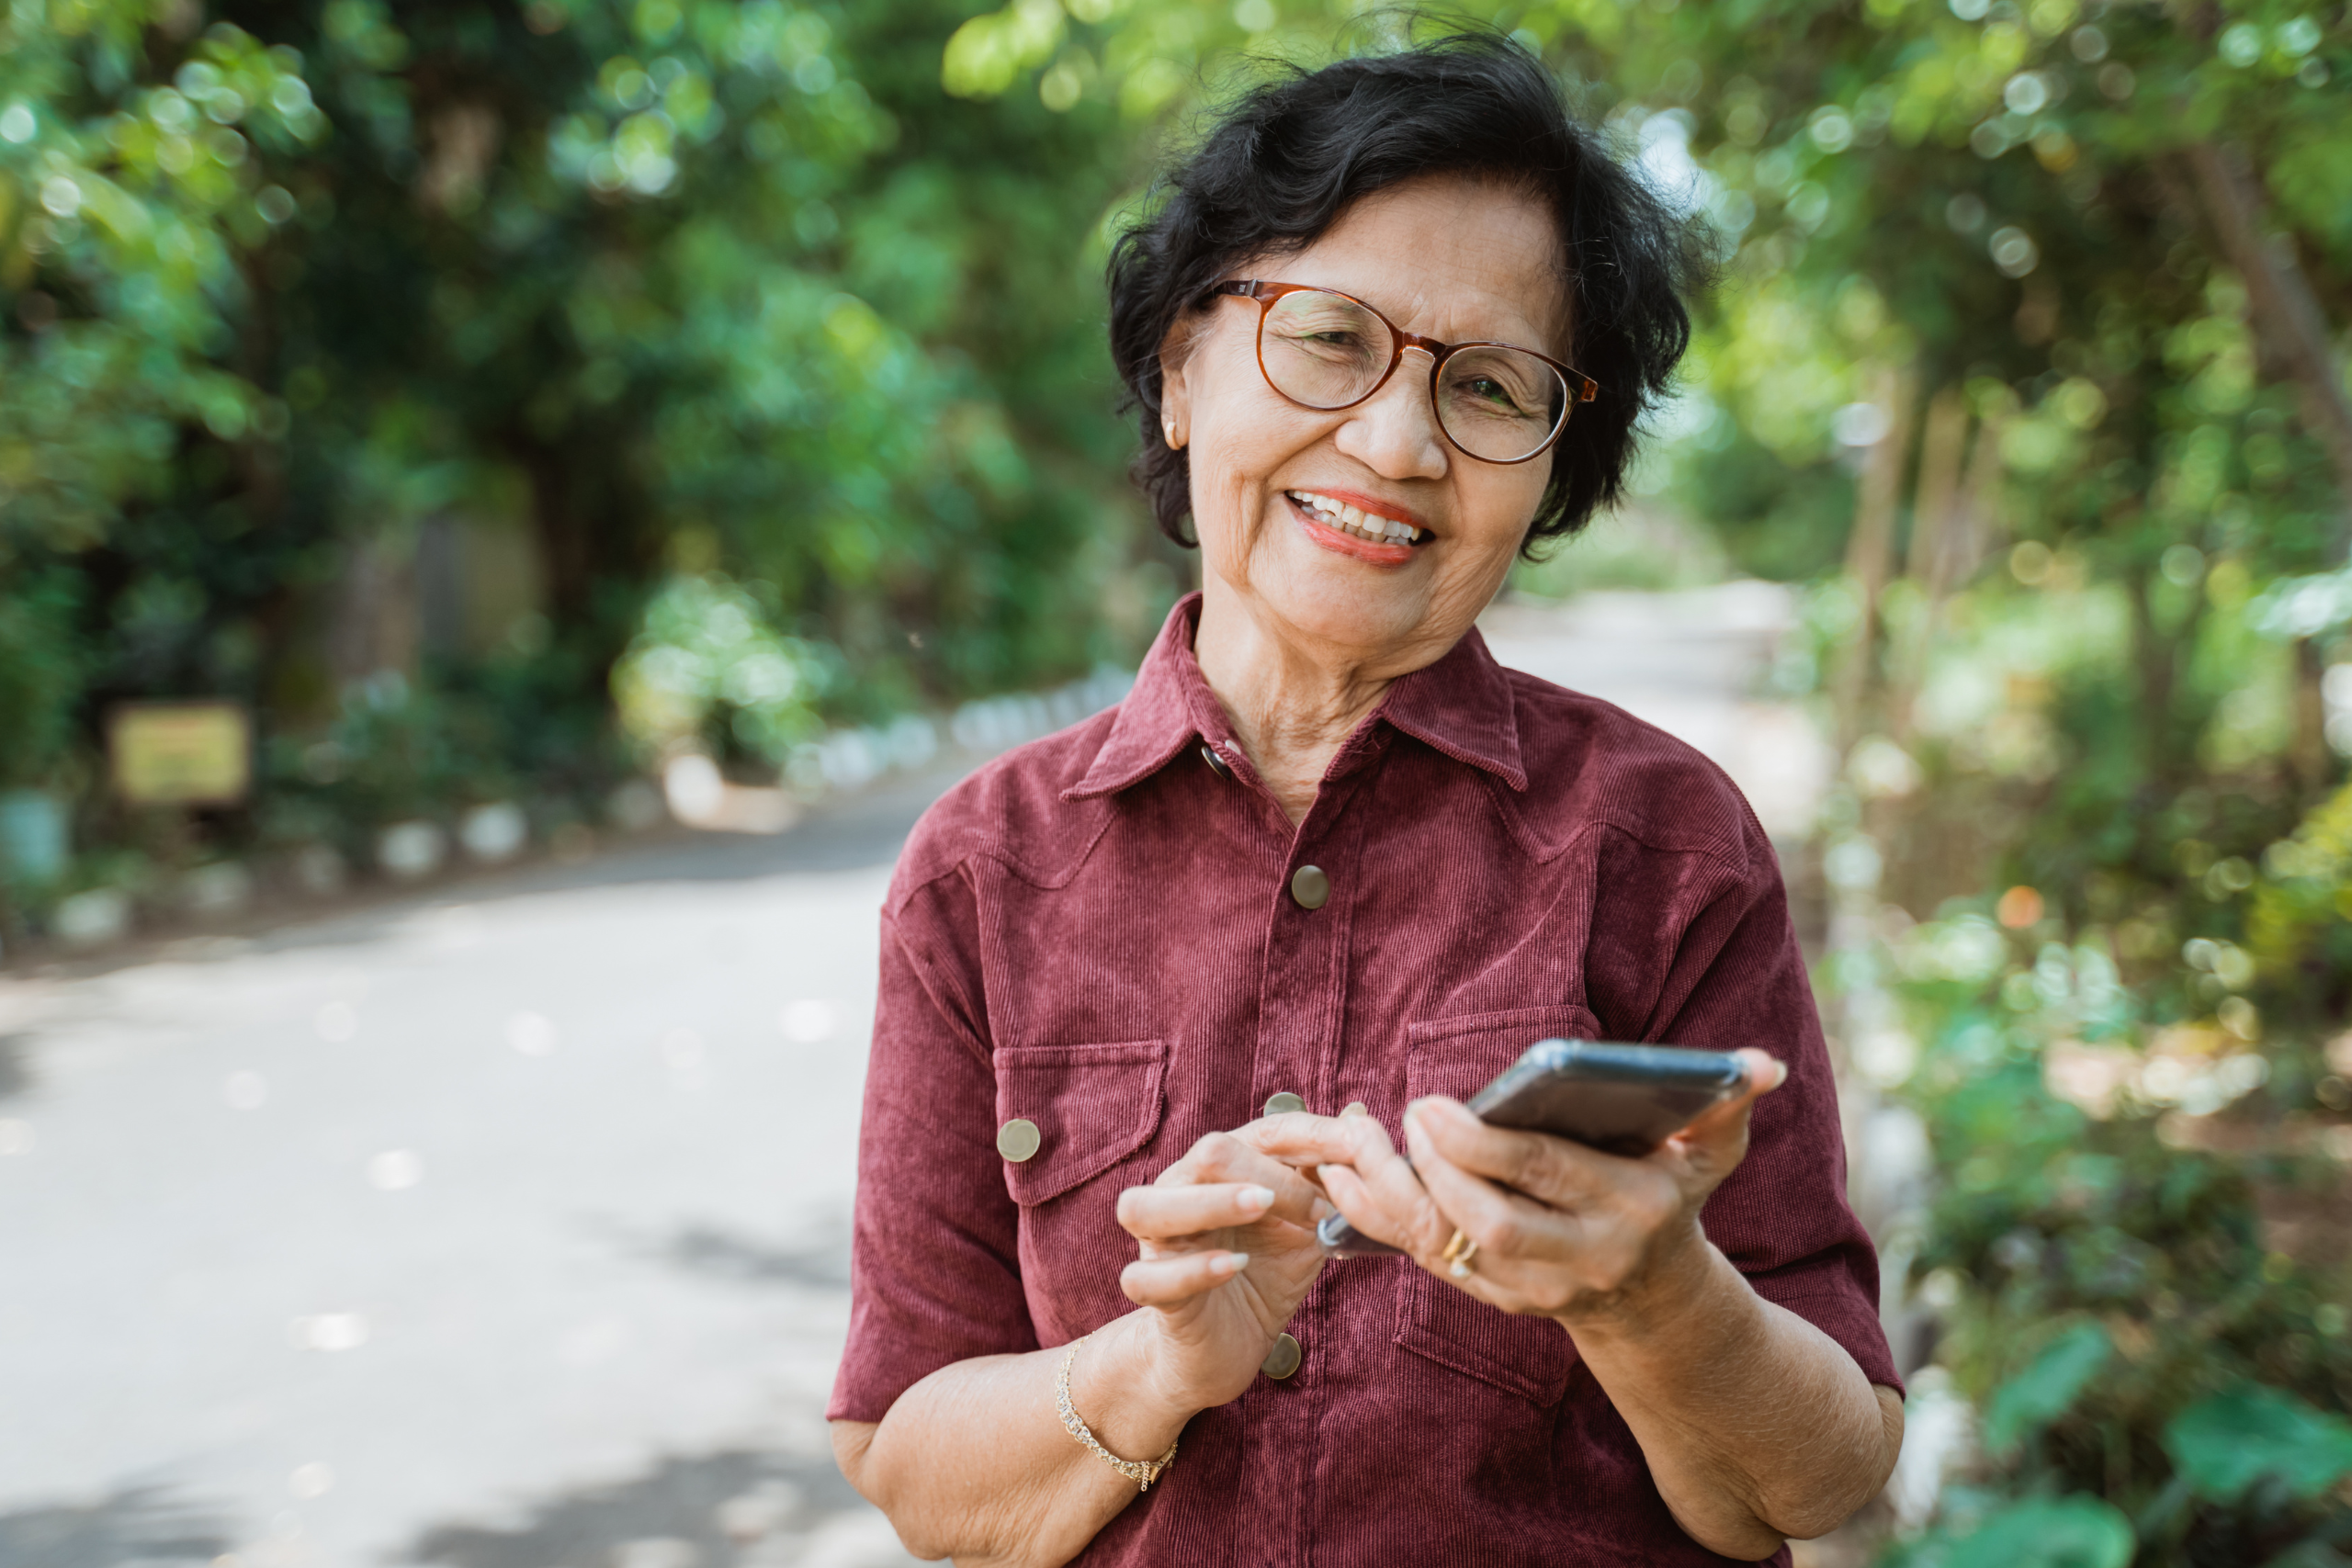 A senior woman smiles while holding a mobile phone.